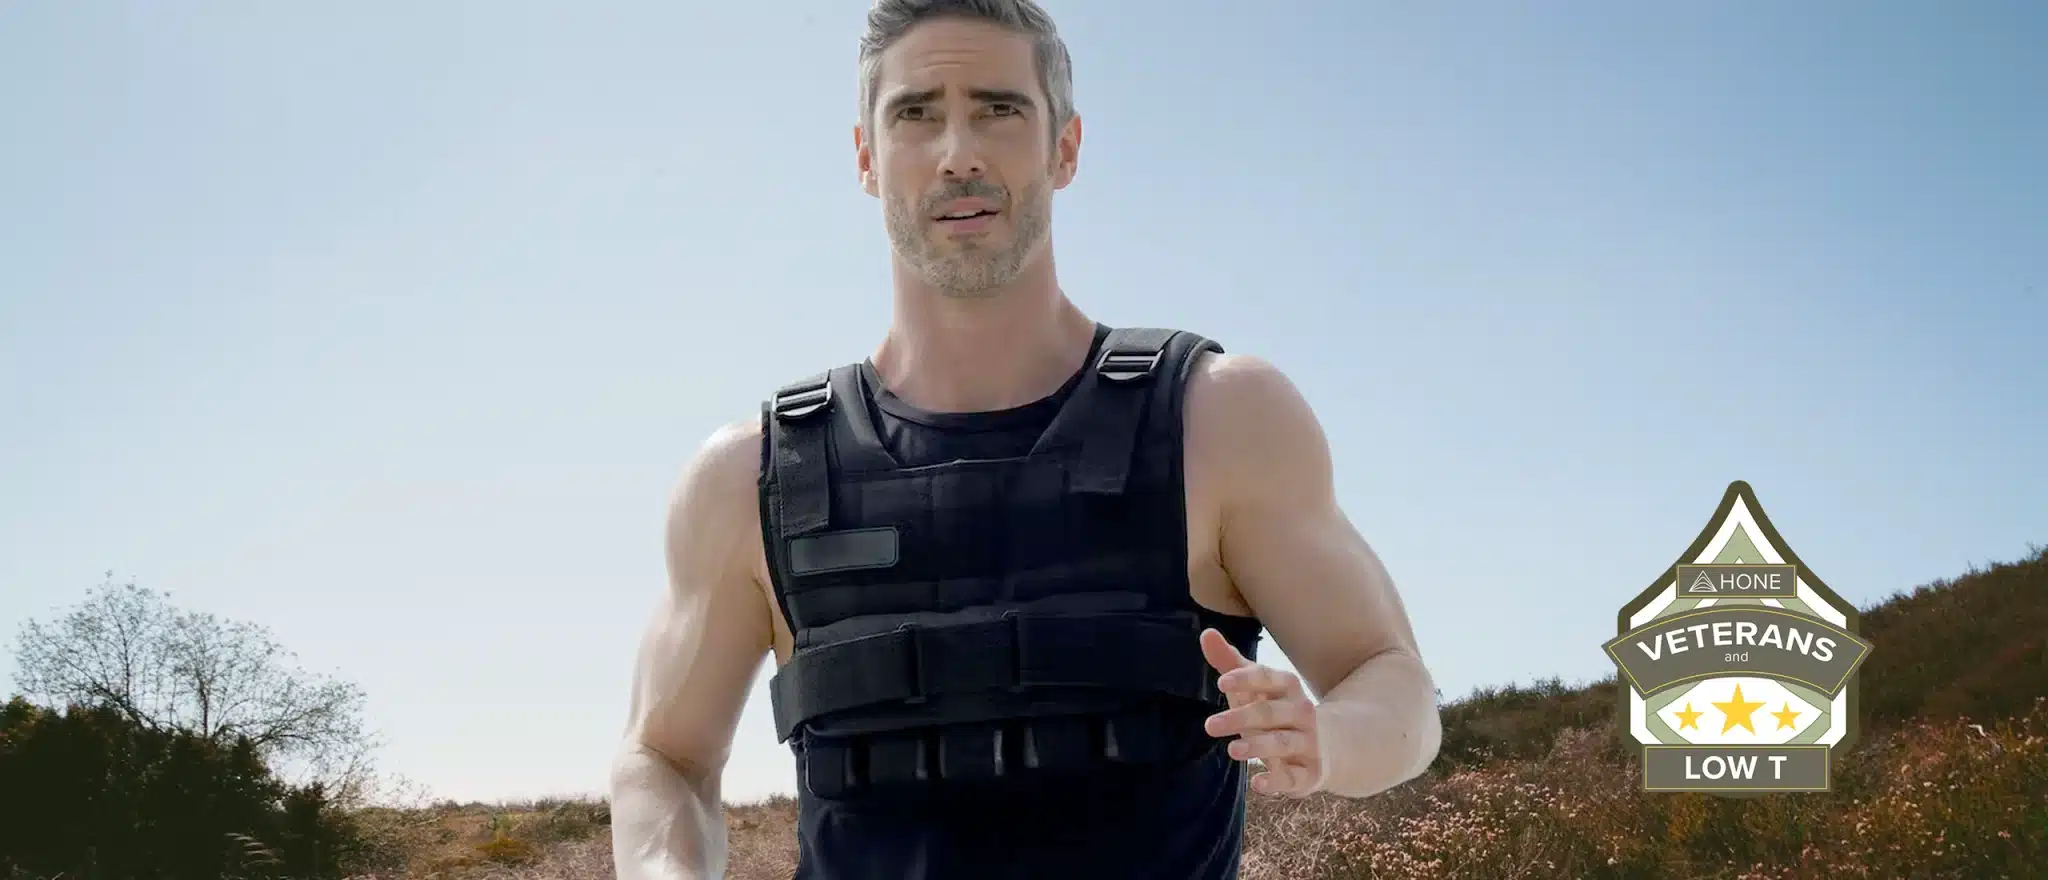 The Best Weighted Vests, Tested and Reviewed by Veterans